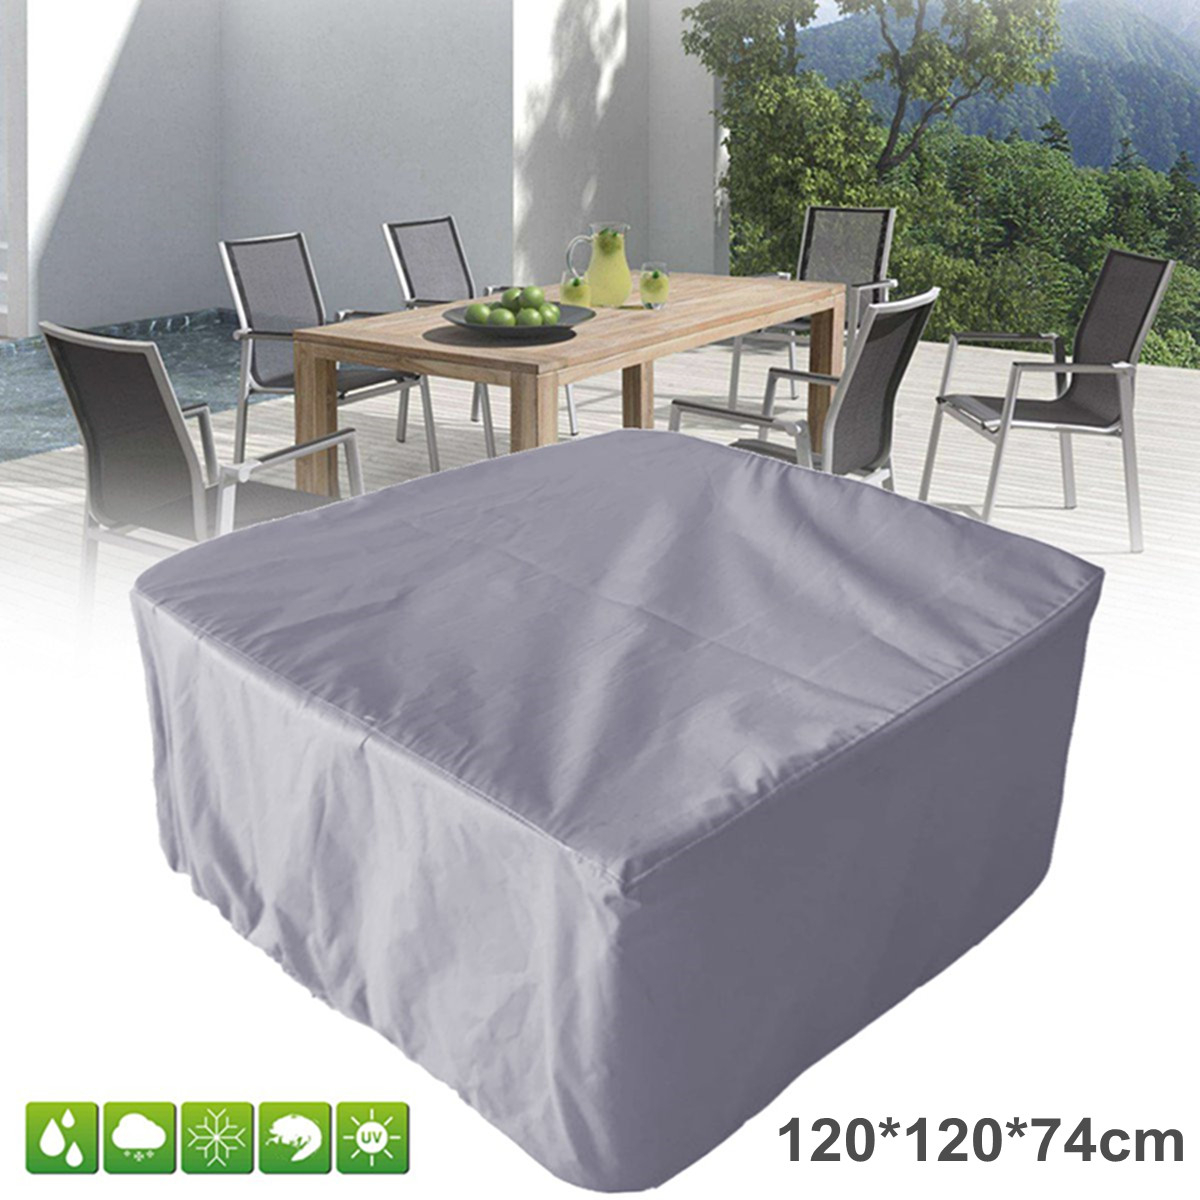 Details About Waterproof Square Table Furniture Cover Garden Yard Patio Outdoor Sun inside measurements 1200 X 1200